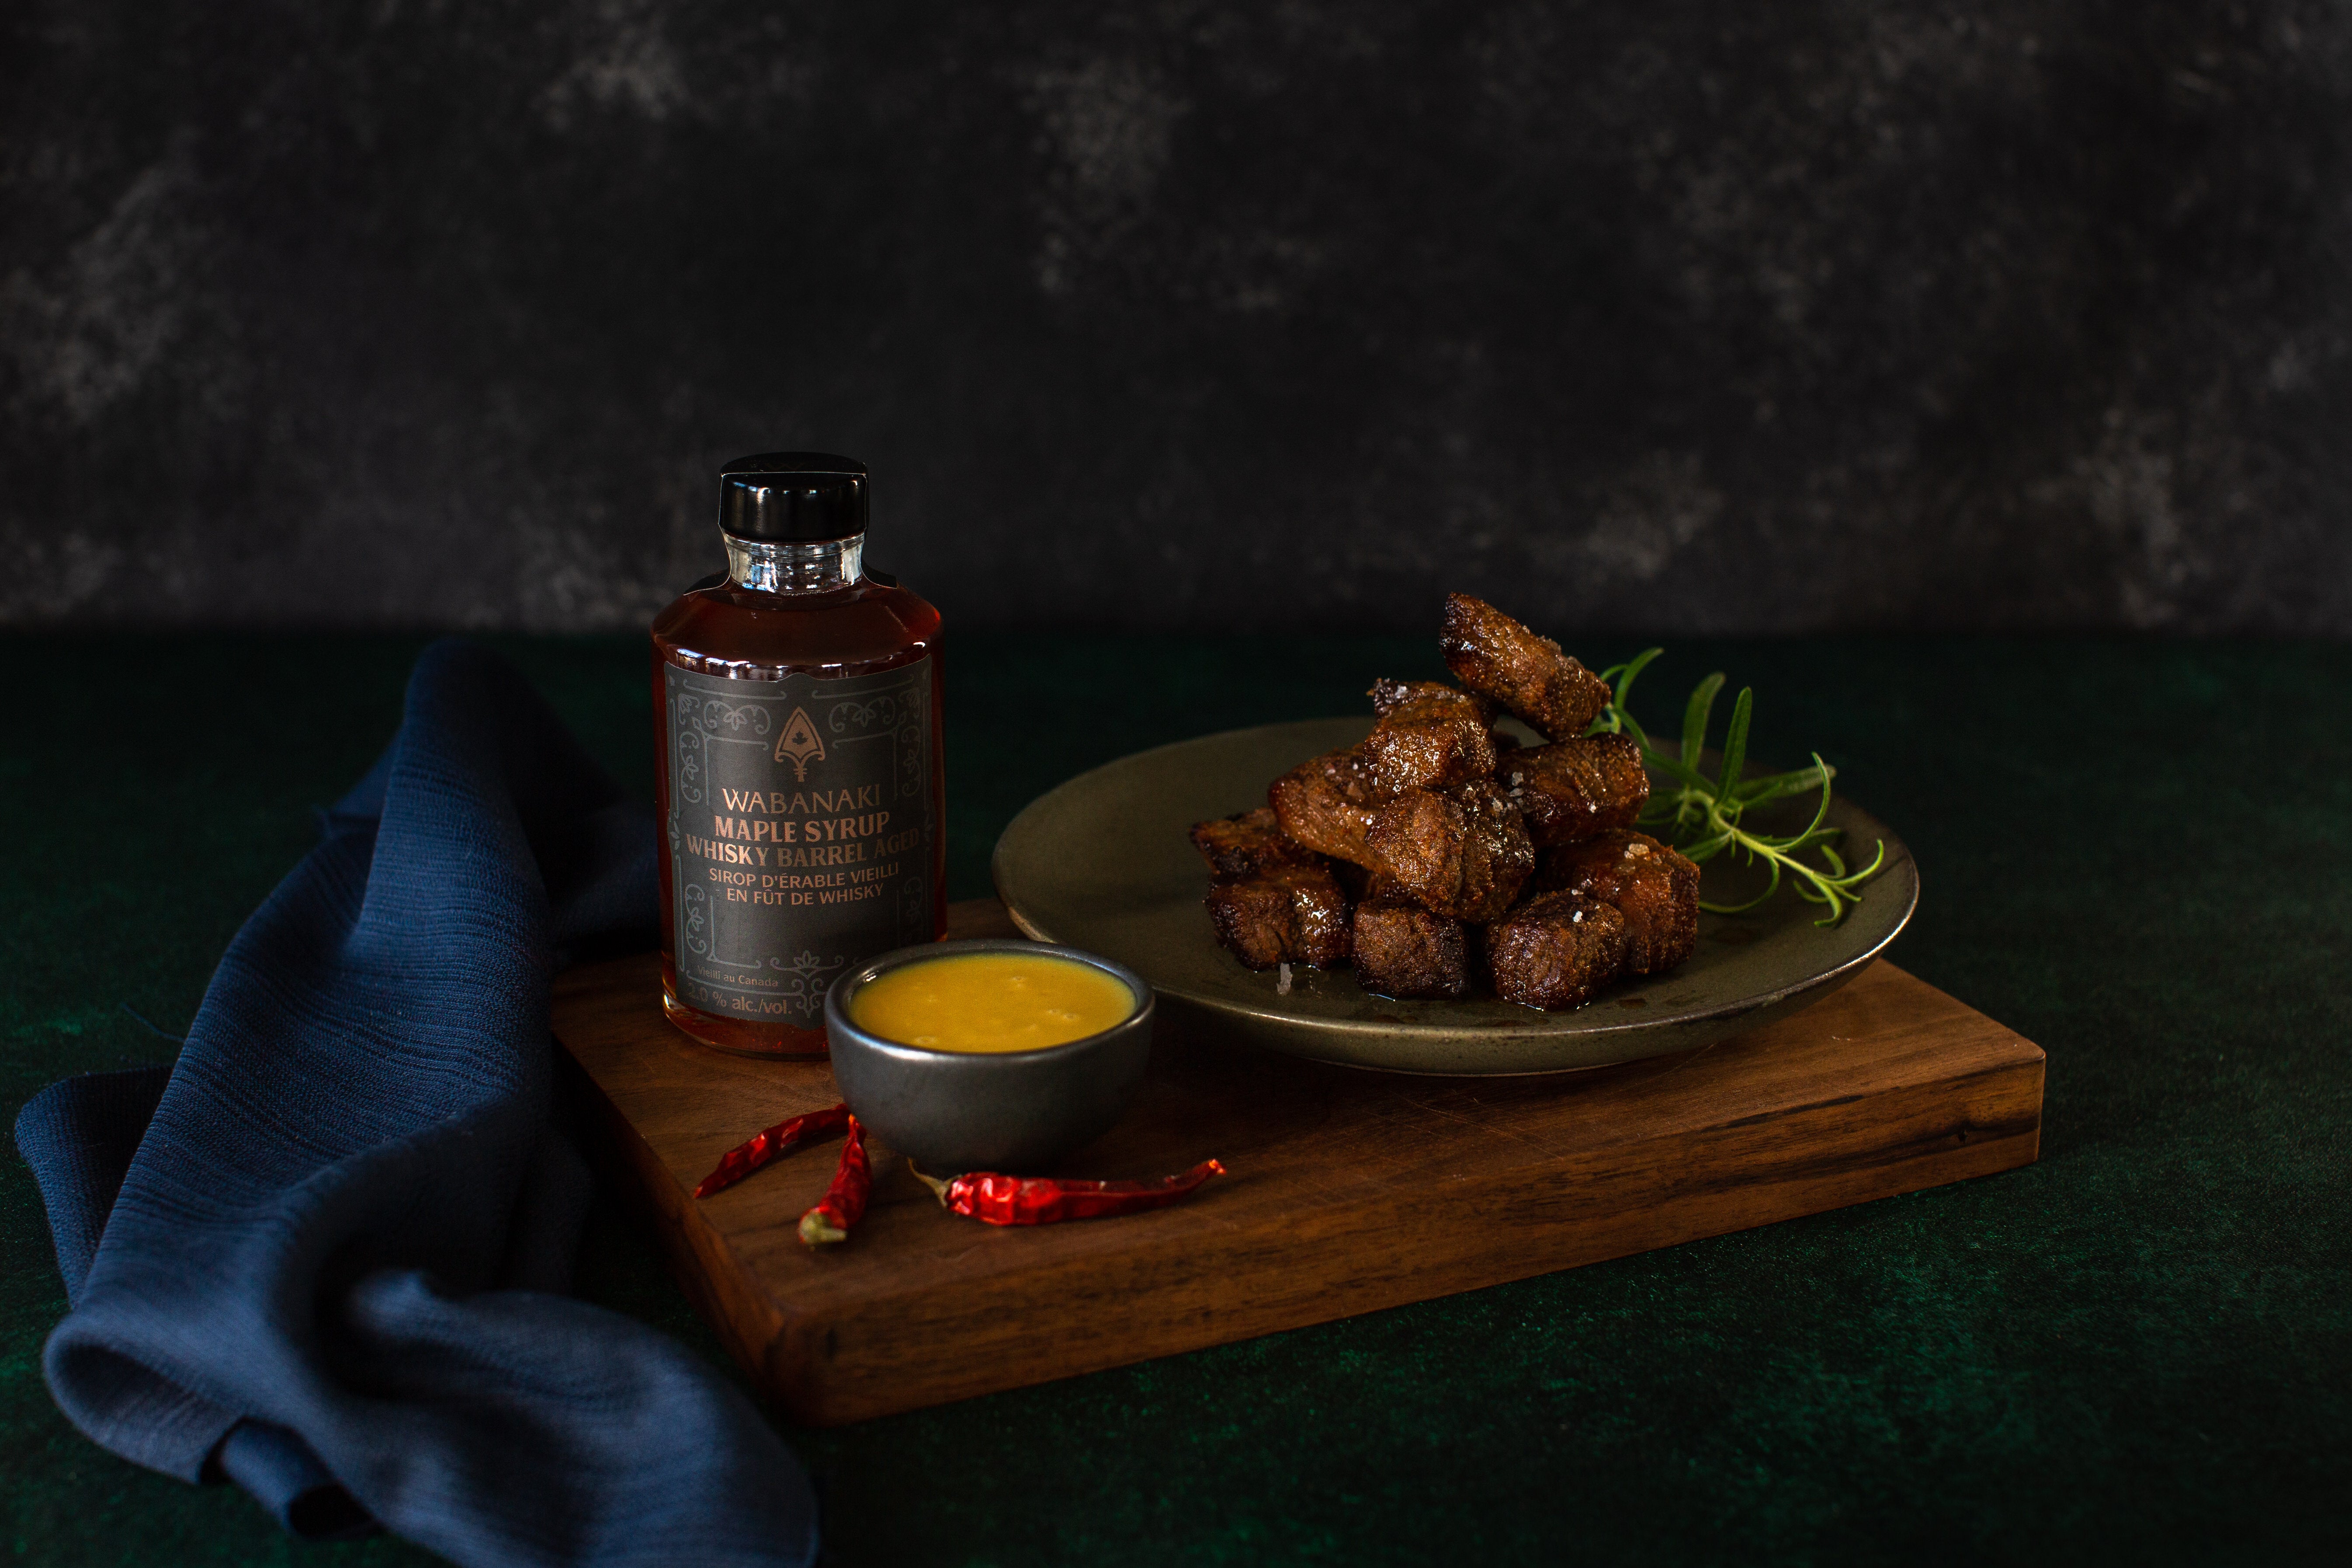 Wabanaki Maple Barrel Aged Whisky Maple Syrup paired with Air Fried Steak Bites